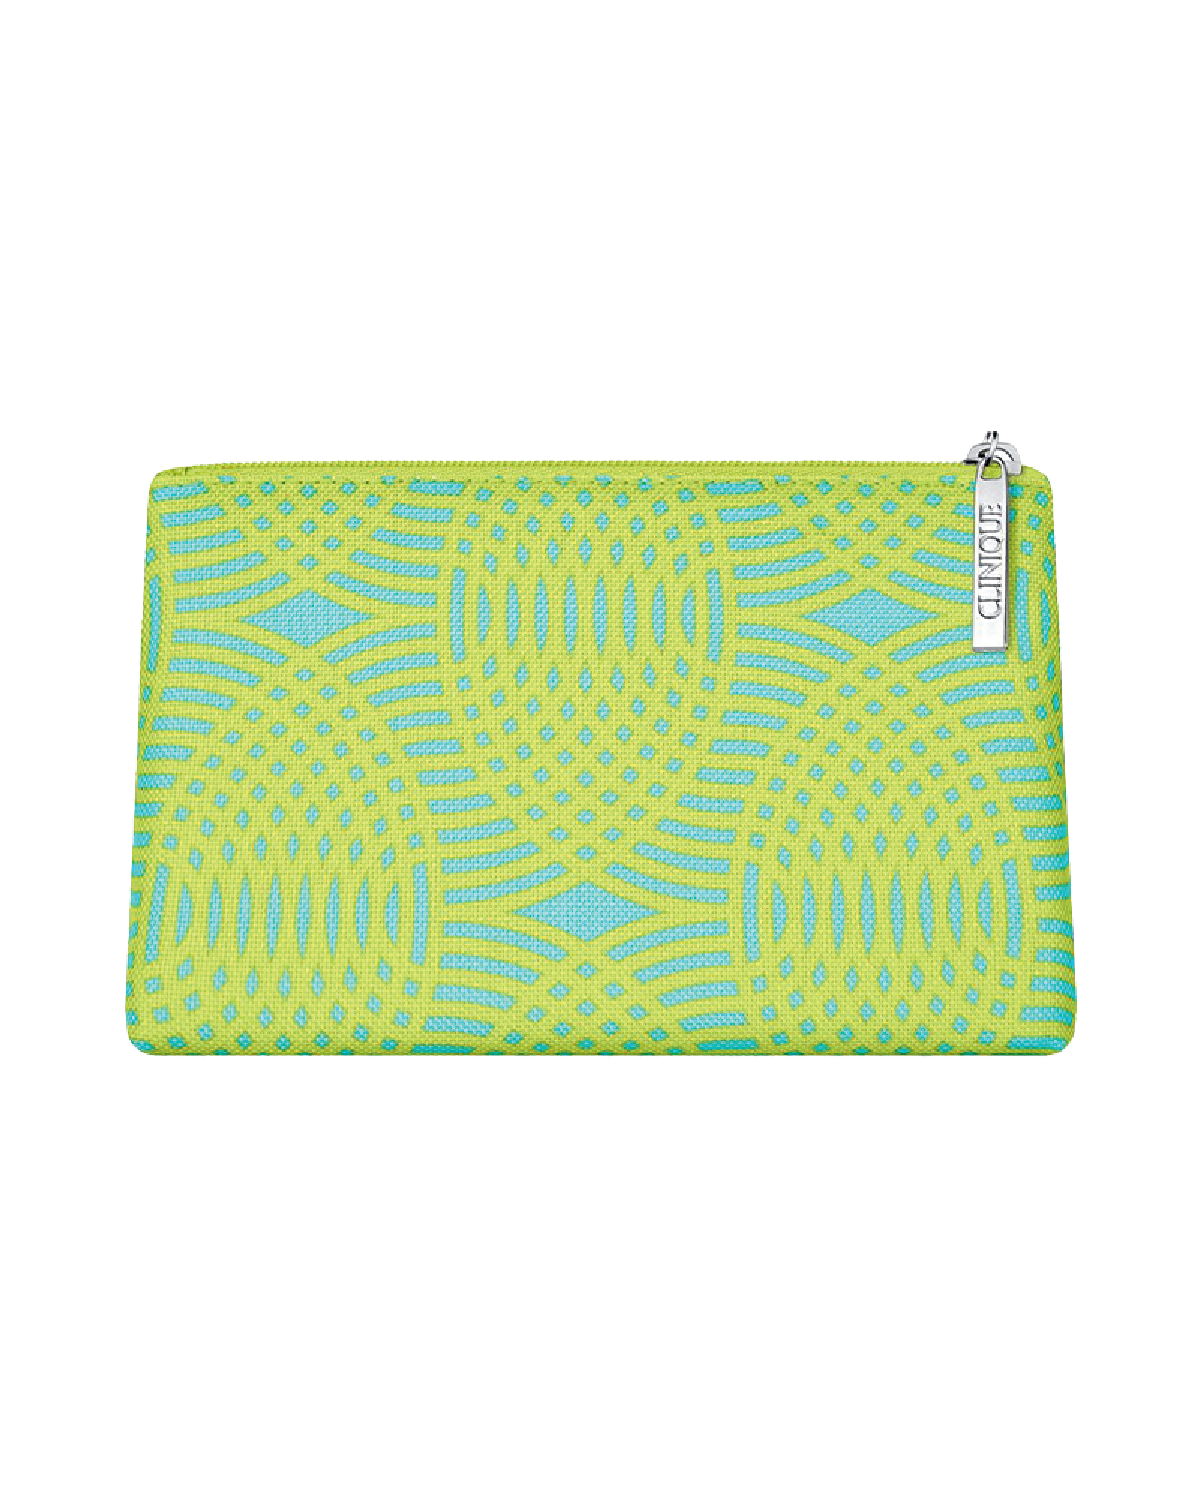 FY20 Green Blue Pouch S